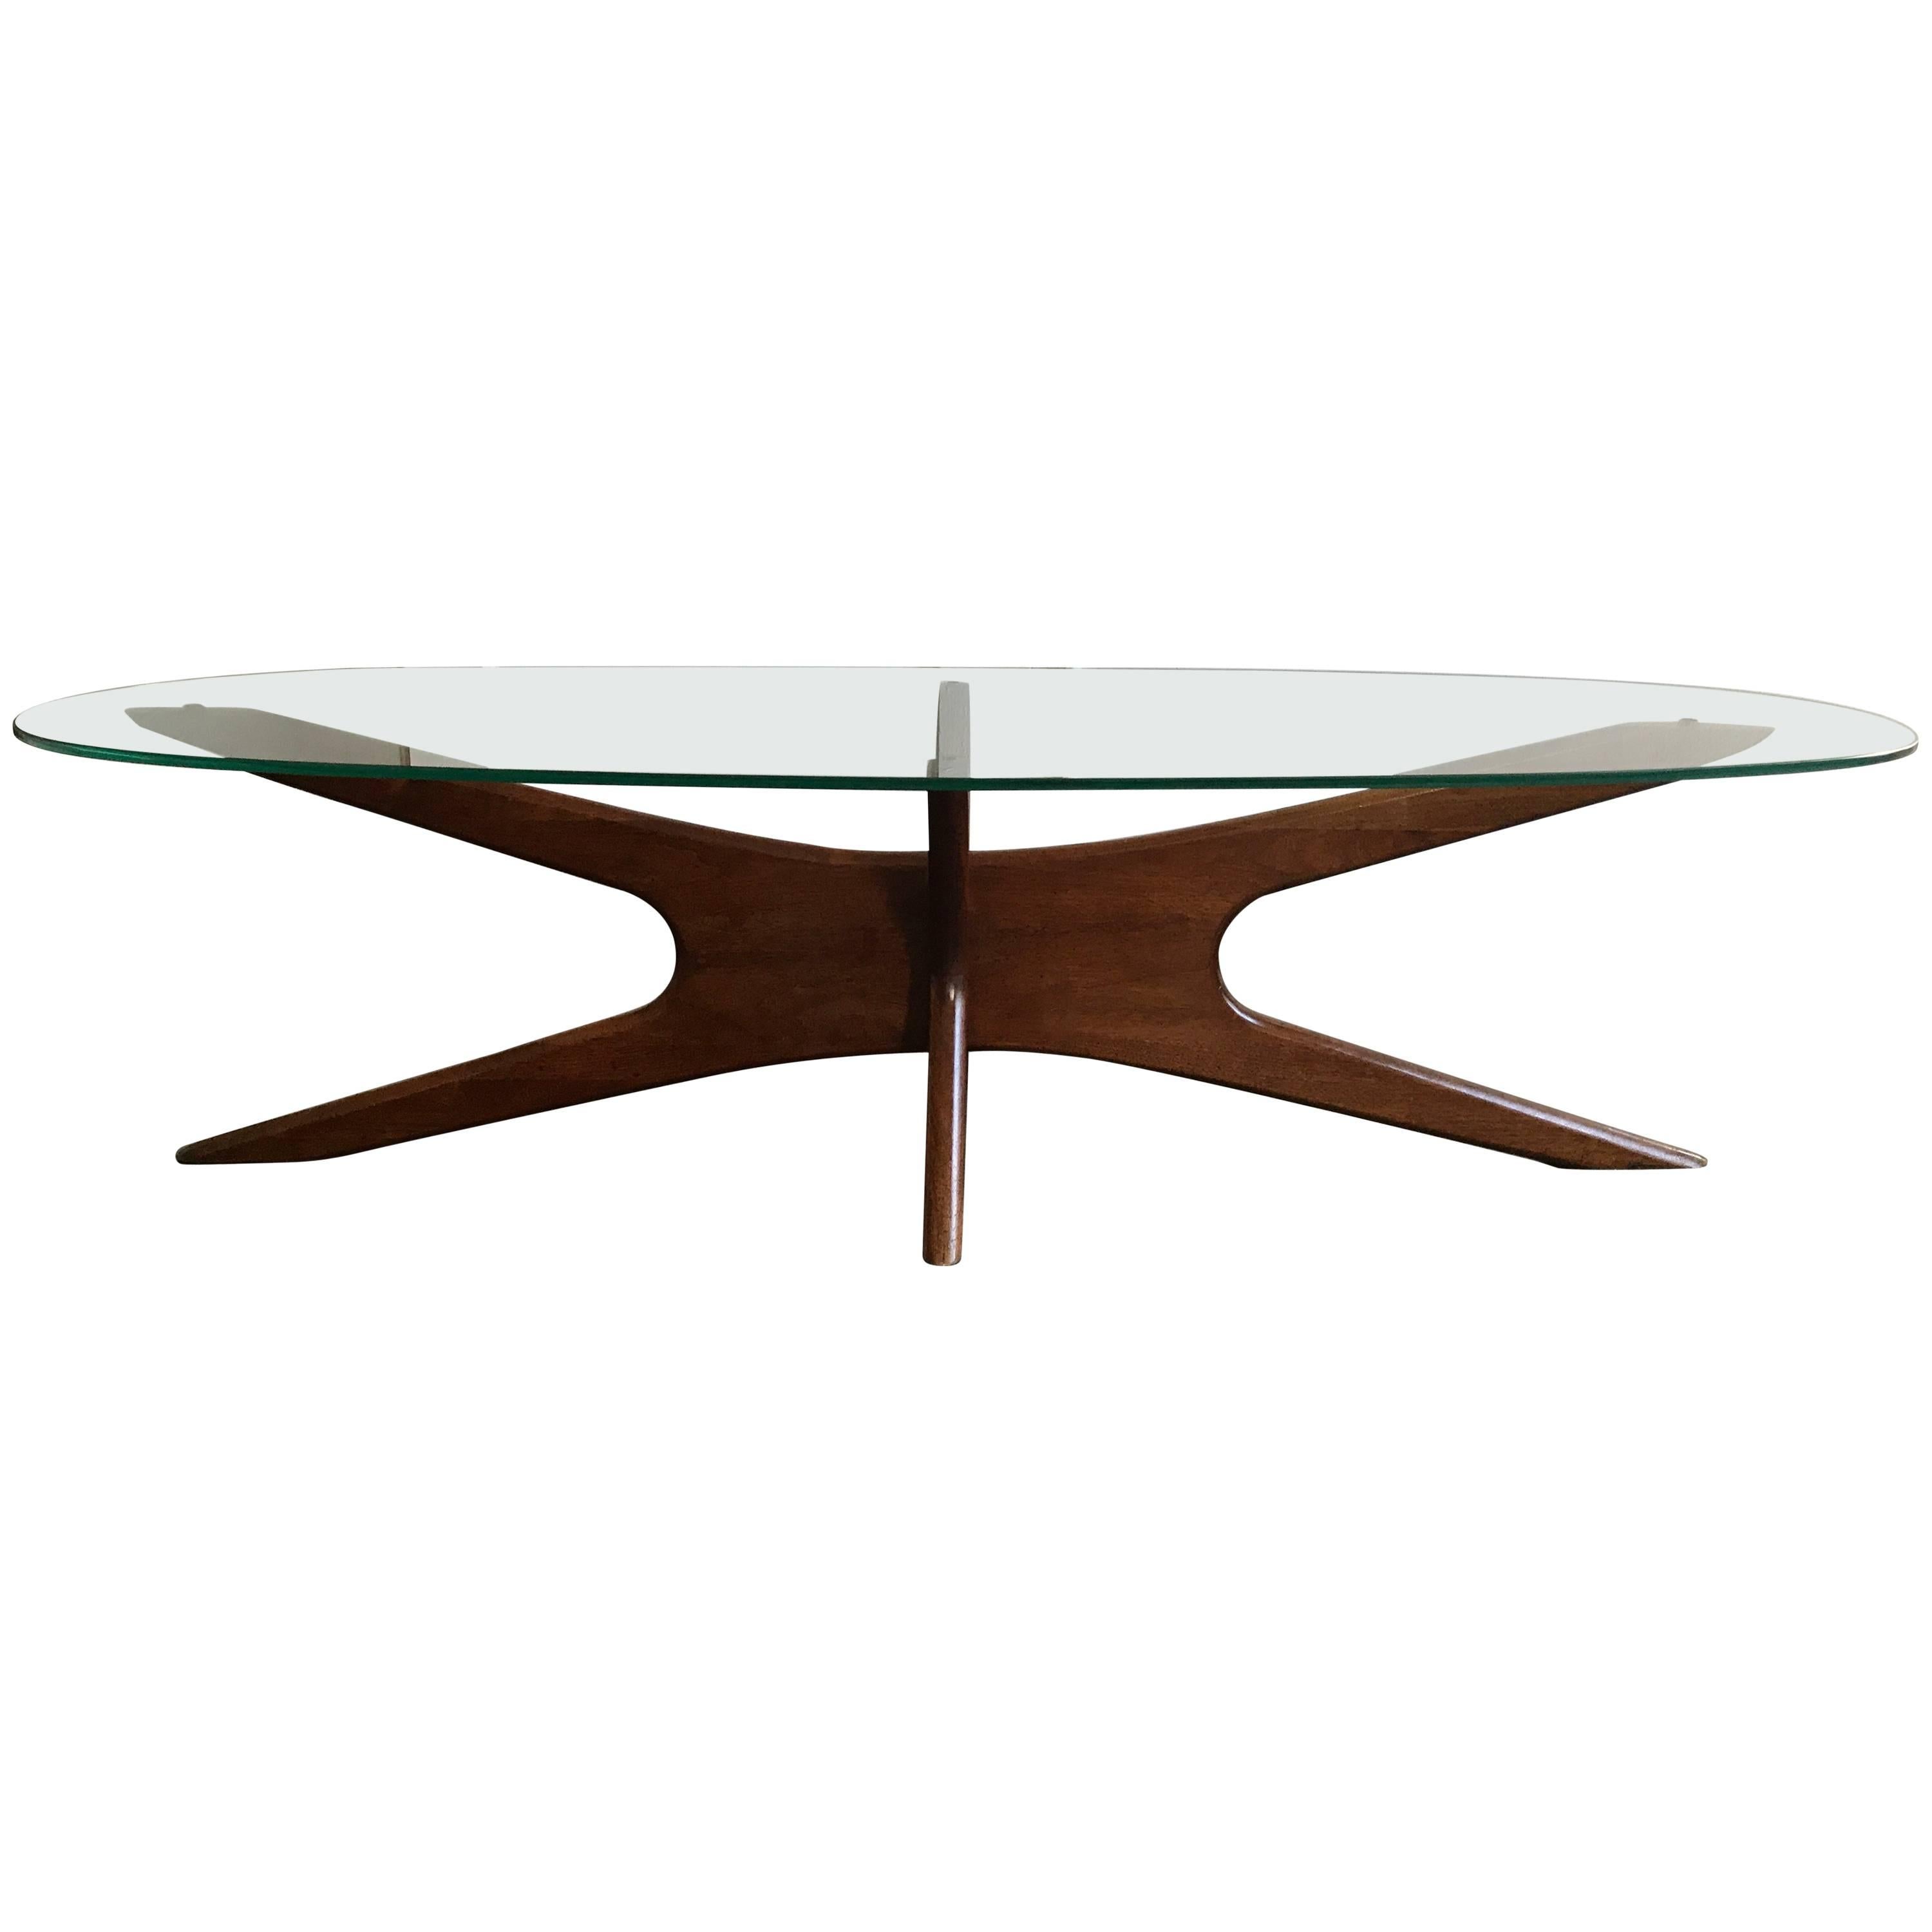 Adrian Pearsall for Craft Associates Cocktail Table